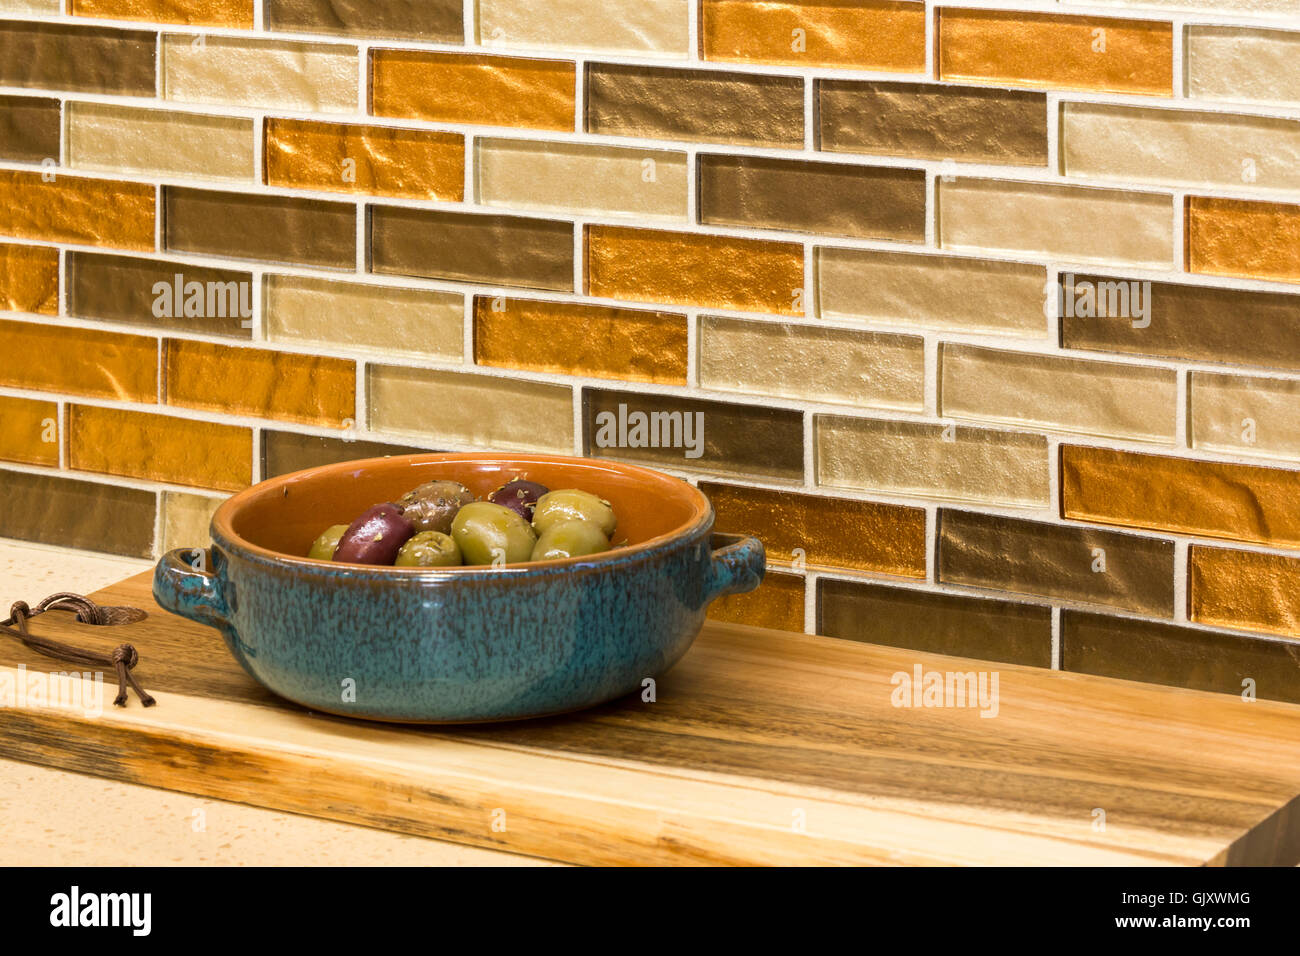 Home kitchen interior detail. Olives appetizers in ceramic serving dish on countertop with glass mosaic tile backsplash. Stock Photo